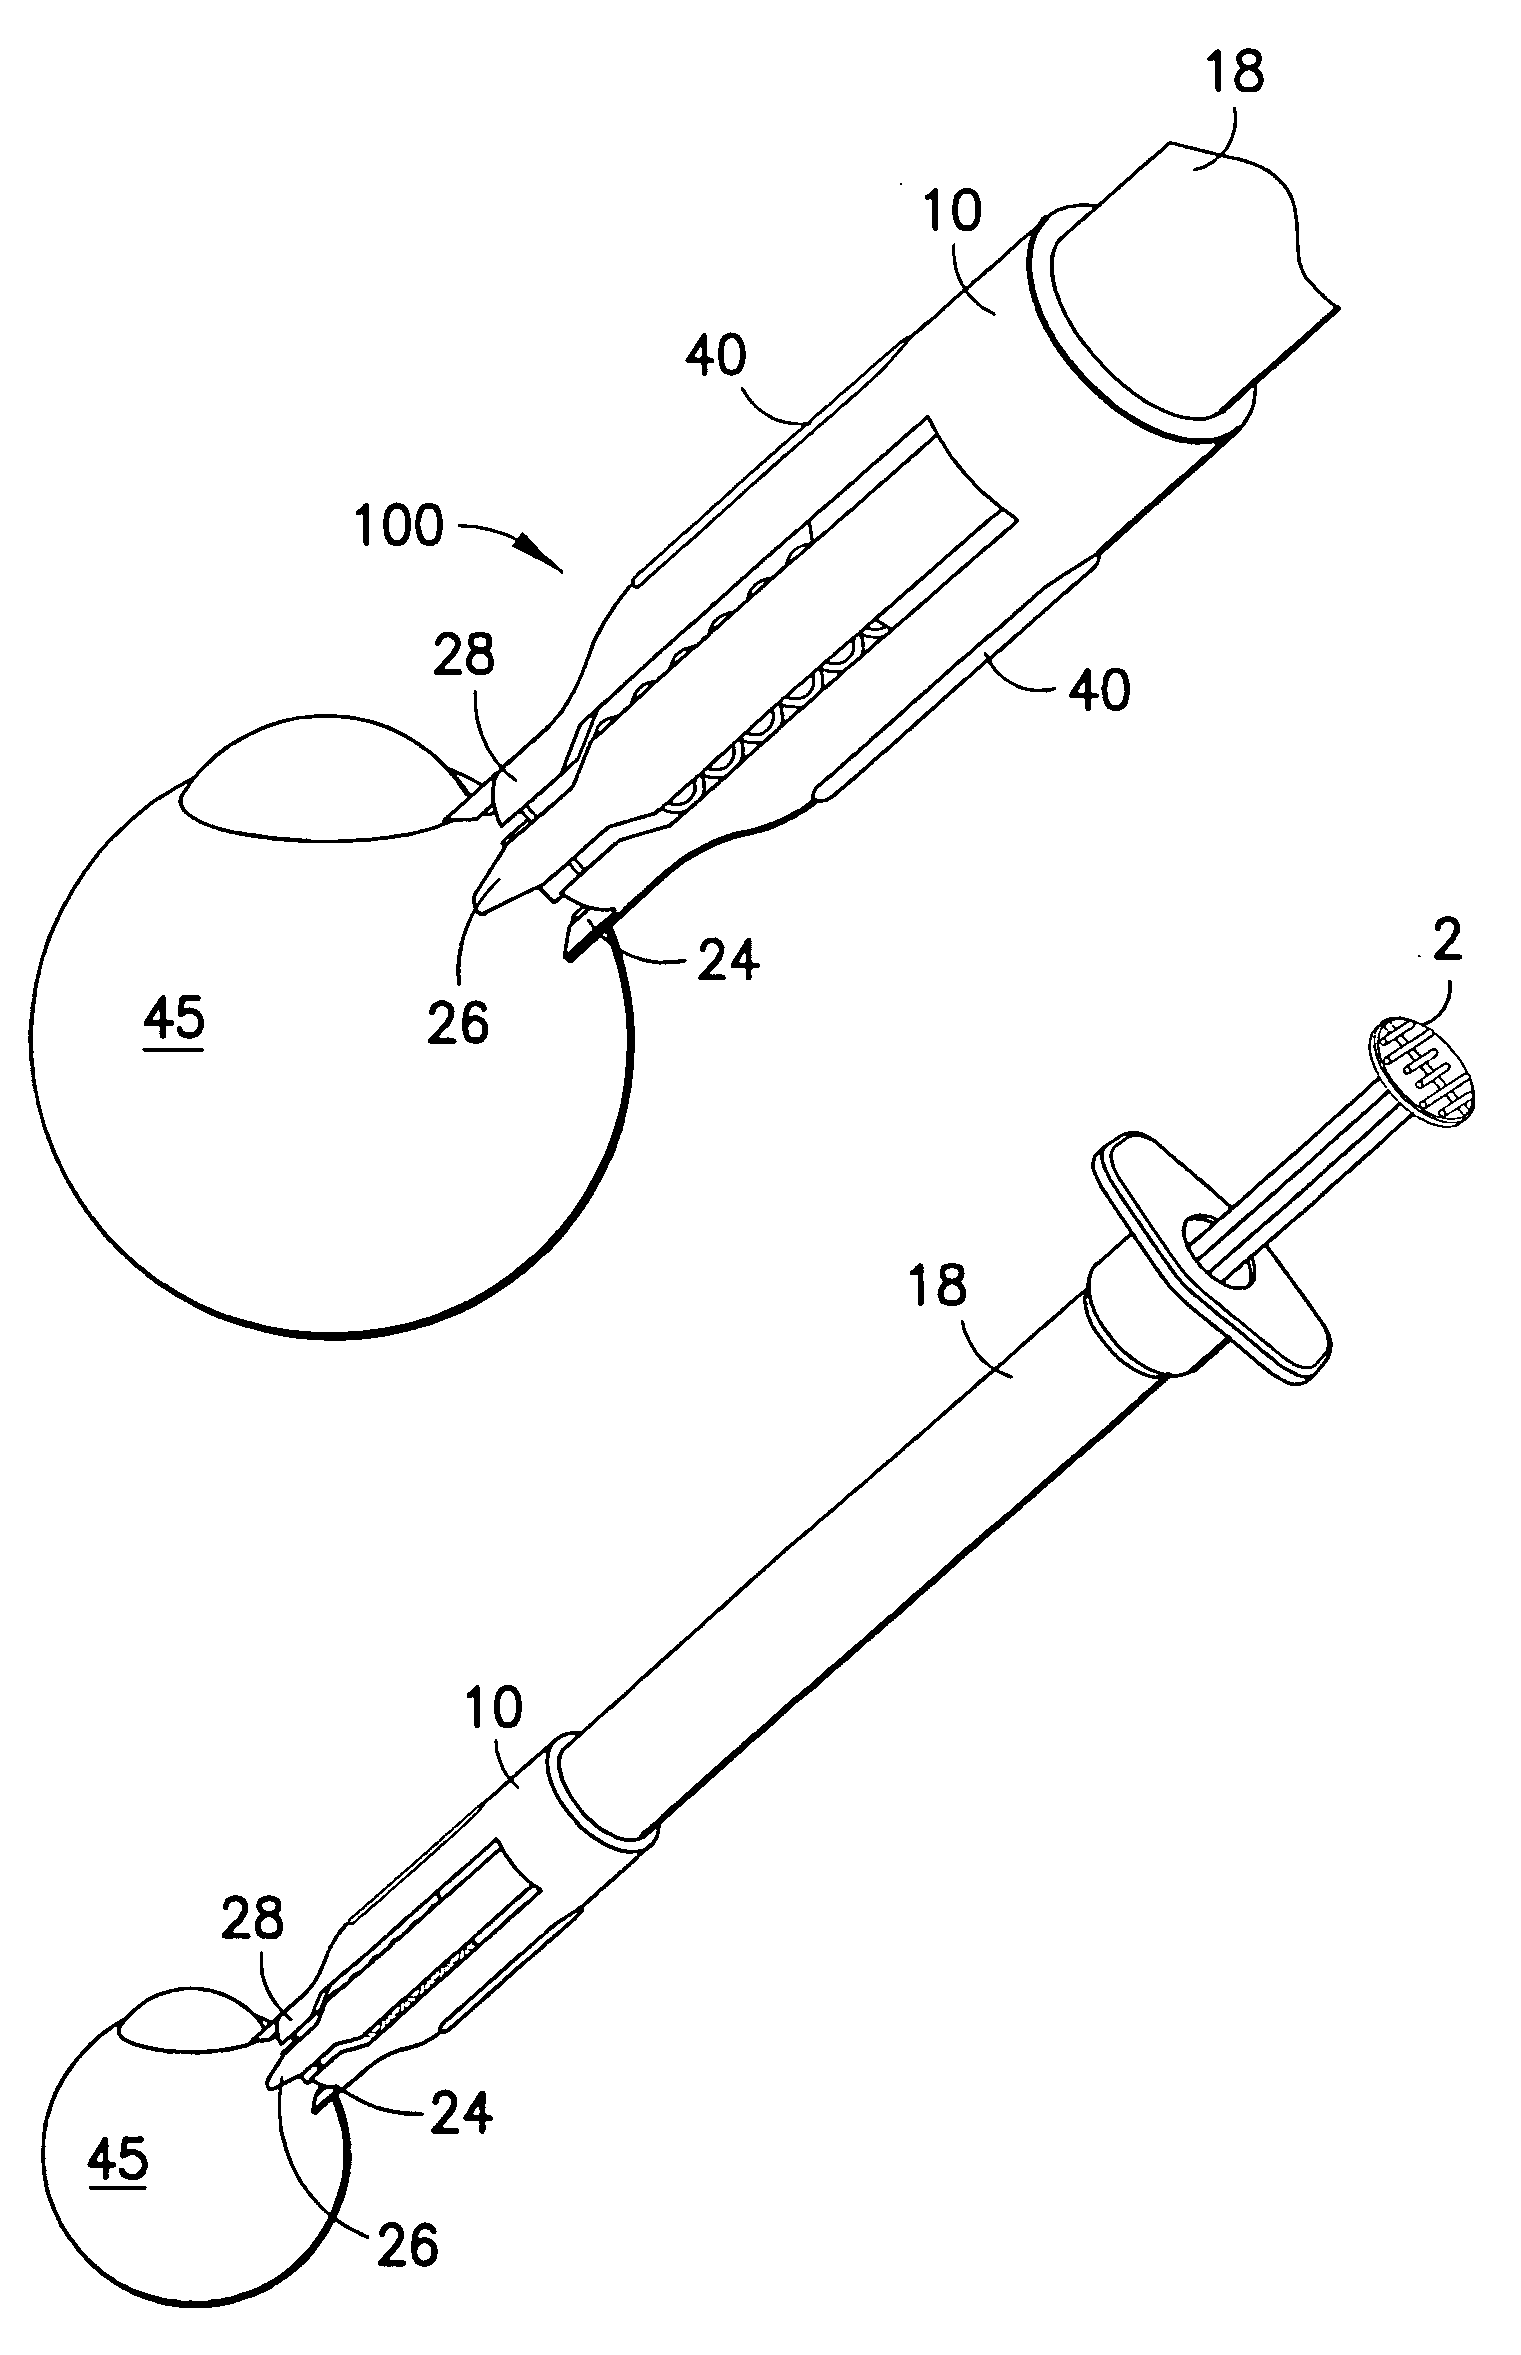 Intravitreal injection device and method